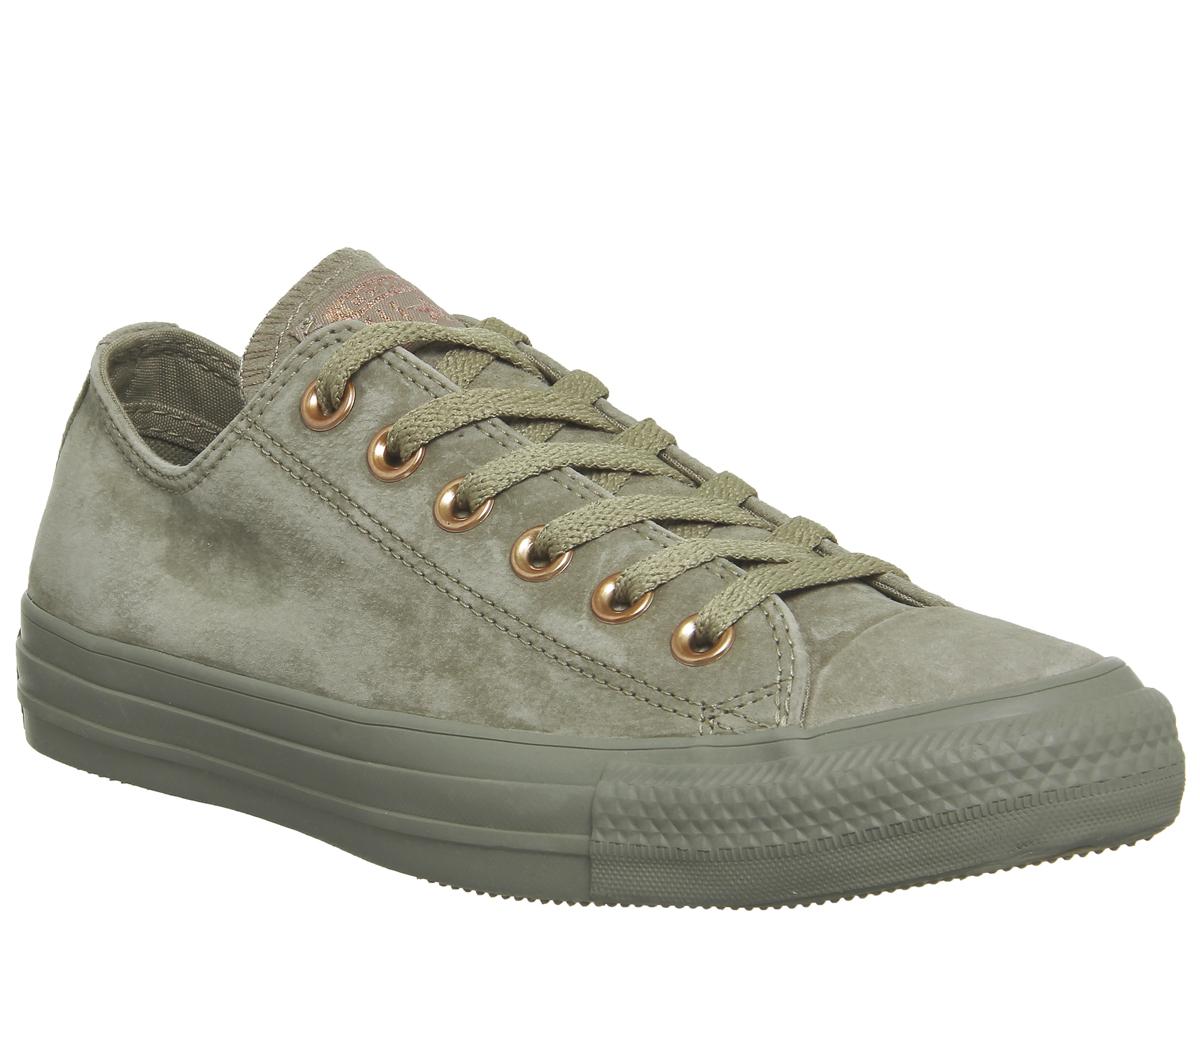 Converse All Star Low Leather Khaki Stud Exclusive - Hers trainers